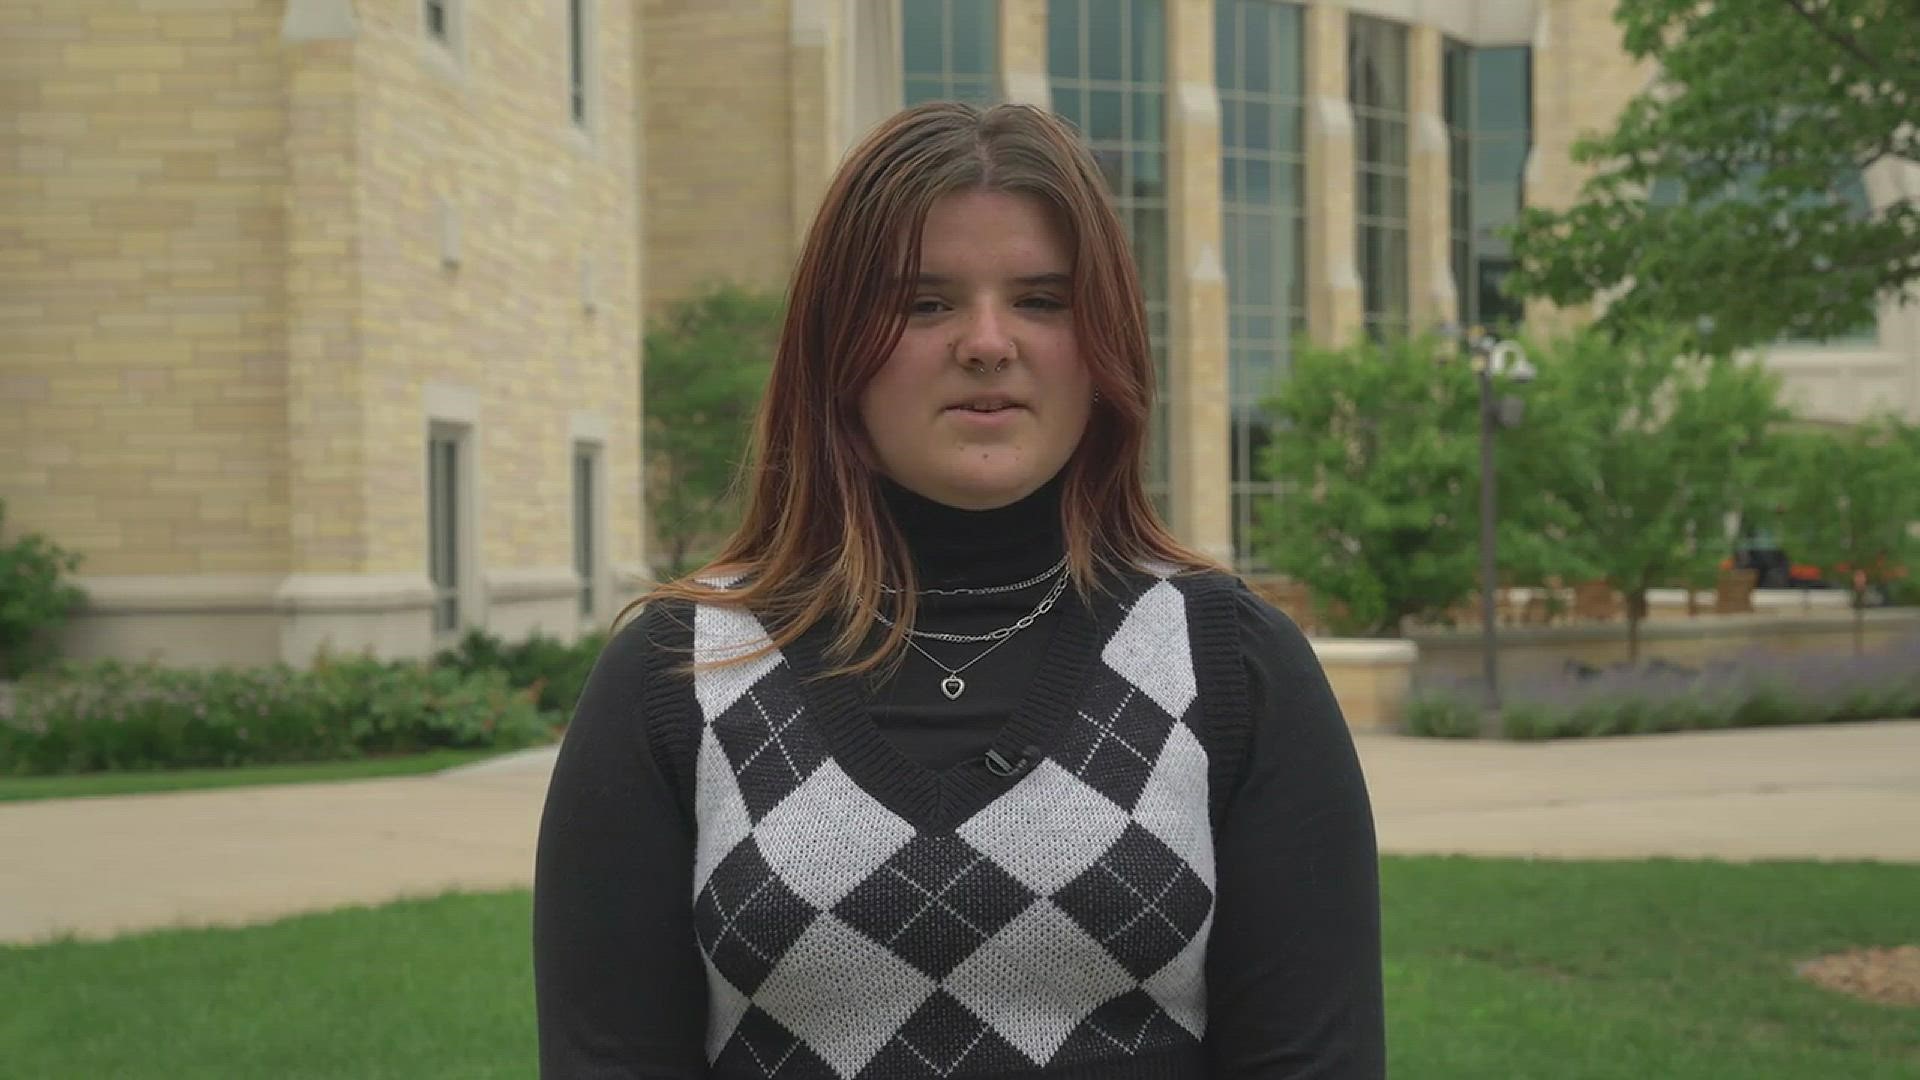 Student reporter Dalaney Villebrun partnered with coaches from KARE 11 to produce this story for ThreeSixty Journalism's annual TV Broadcast Camp.